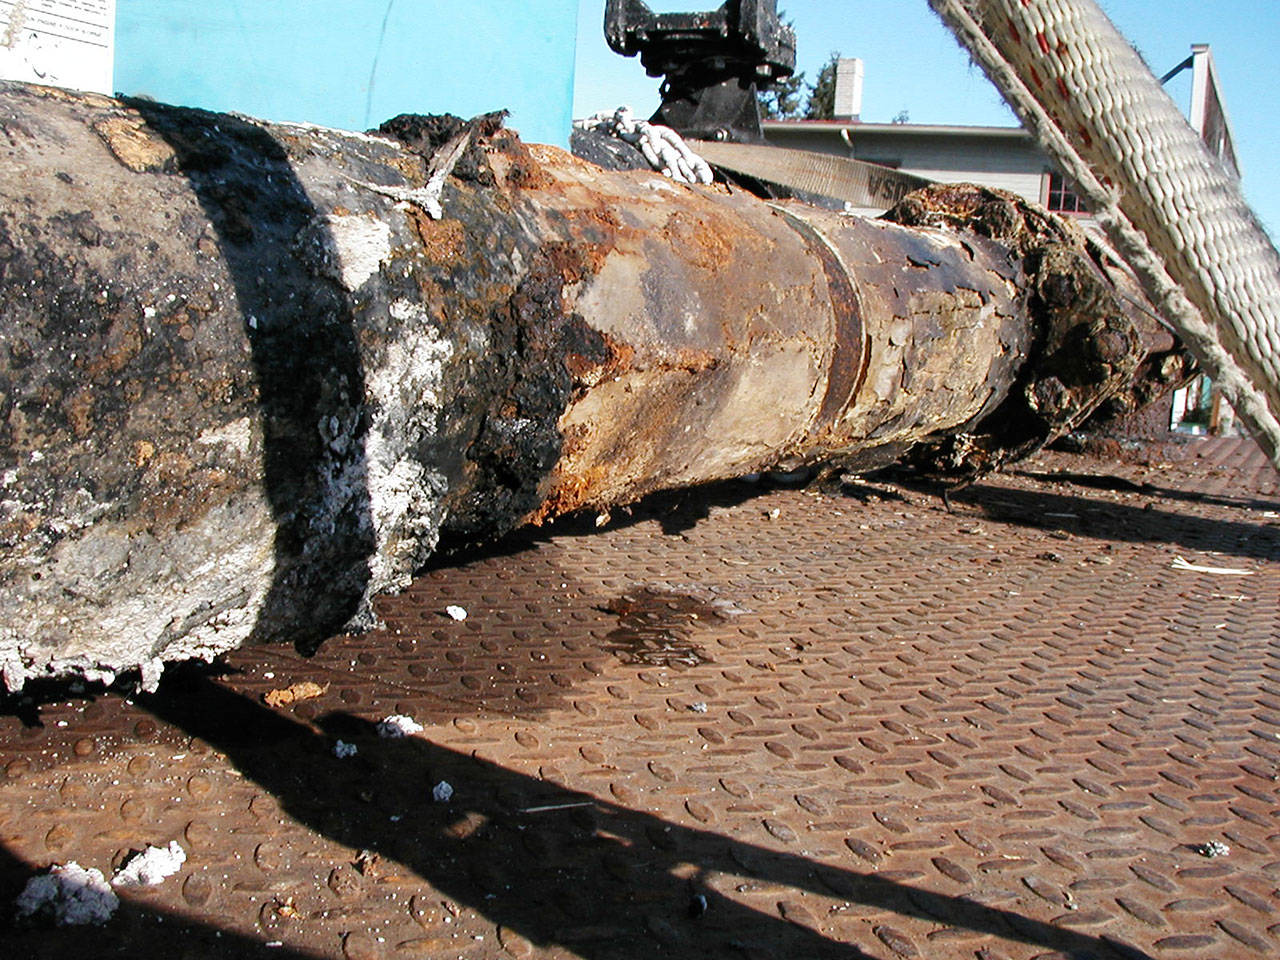 This pipe was at the end of its useful life and removed during a 2011 upgrade to Langley’s sewage system. Failing pumps were also upgraded to accommodate increased flow projections. (Photo provided)